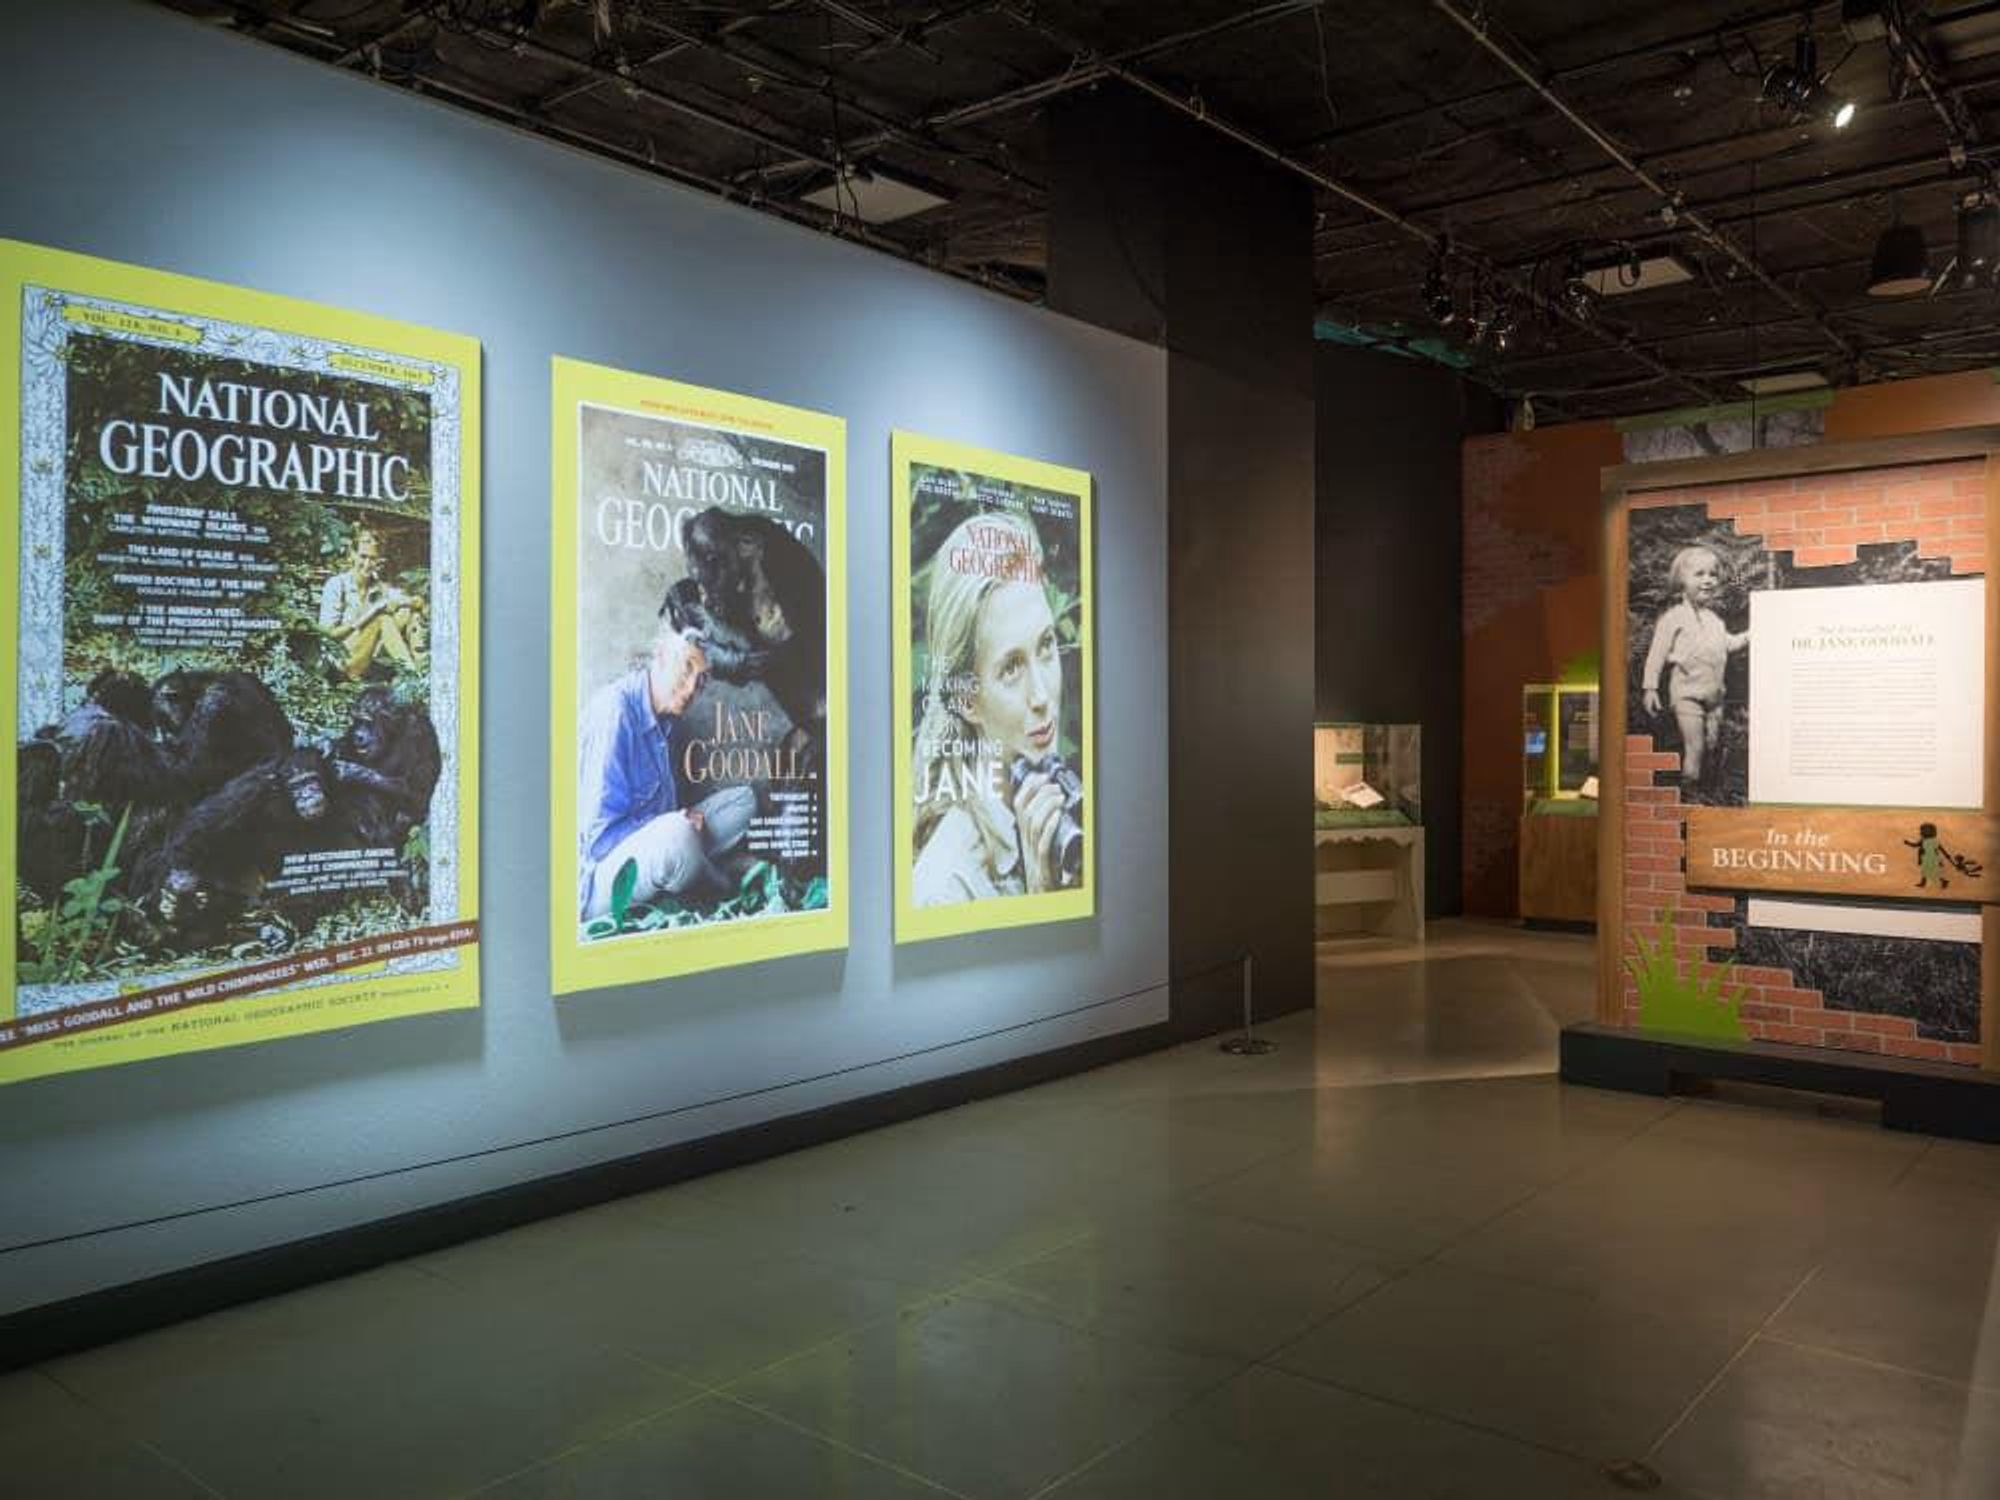 Perot Museum of Nature and Science presents “Becoming Jane: The Evolution of Dr. Jane Goodall”